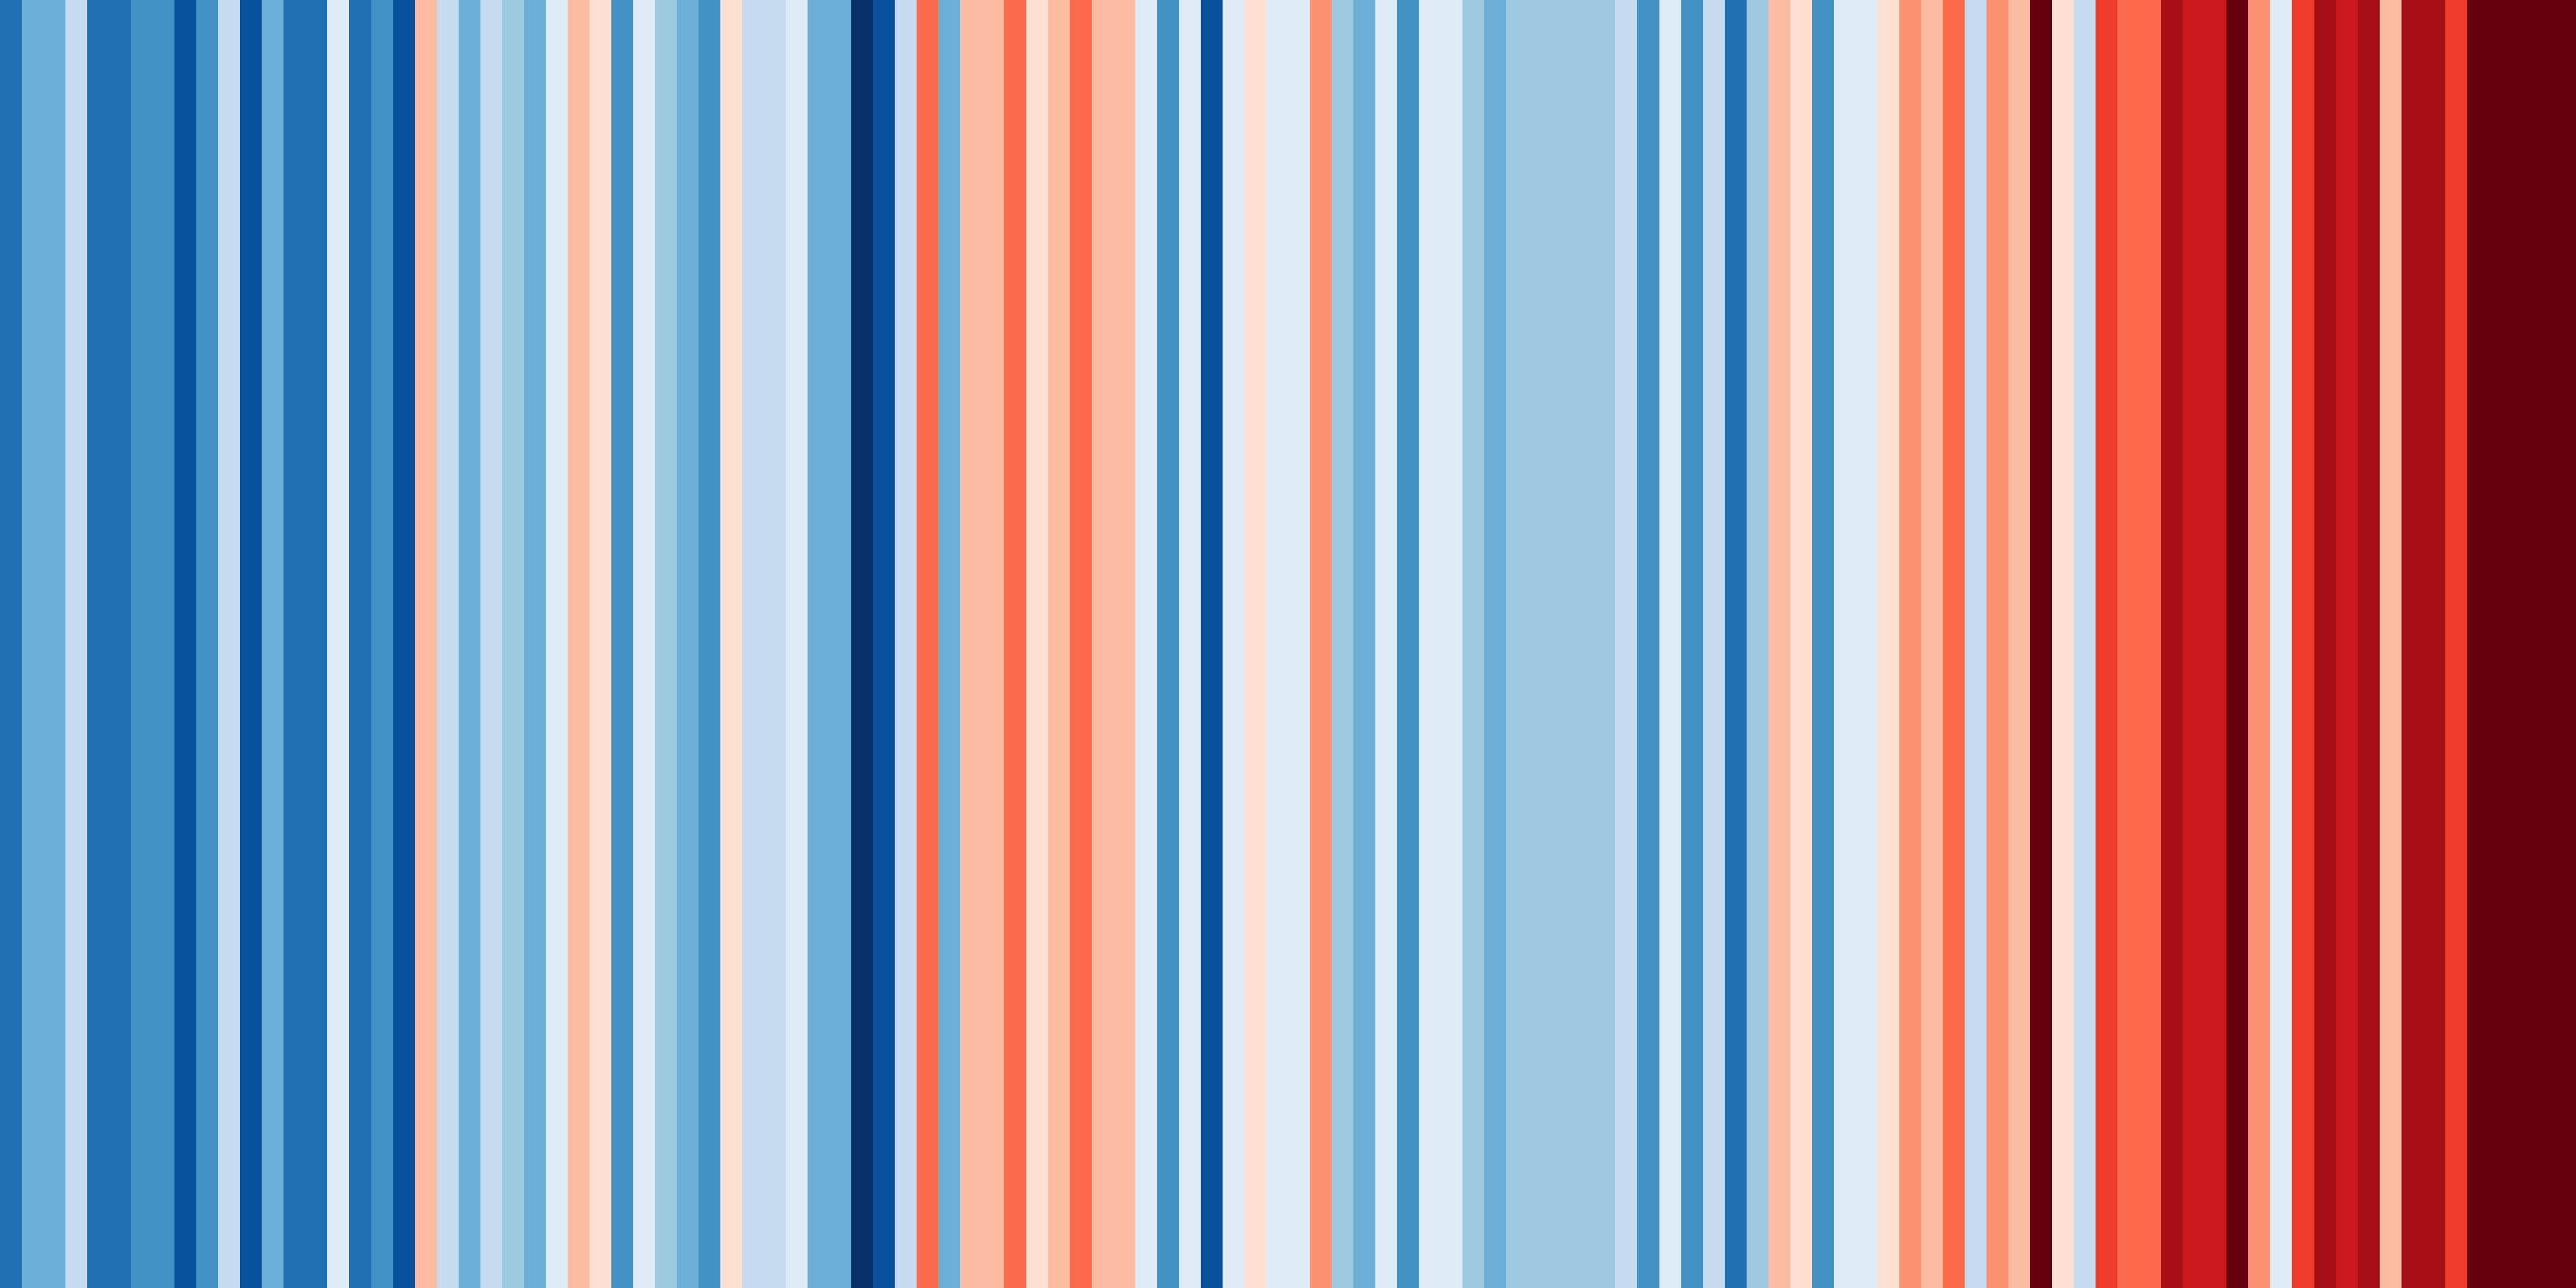 Temperature stripes for Italy